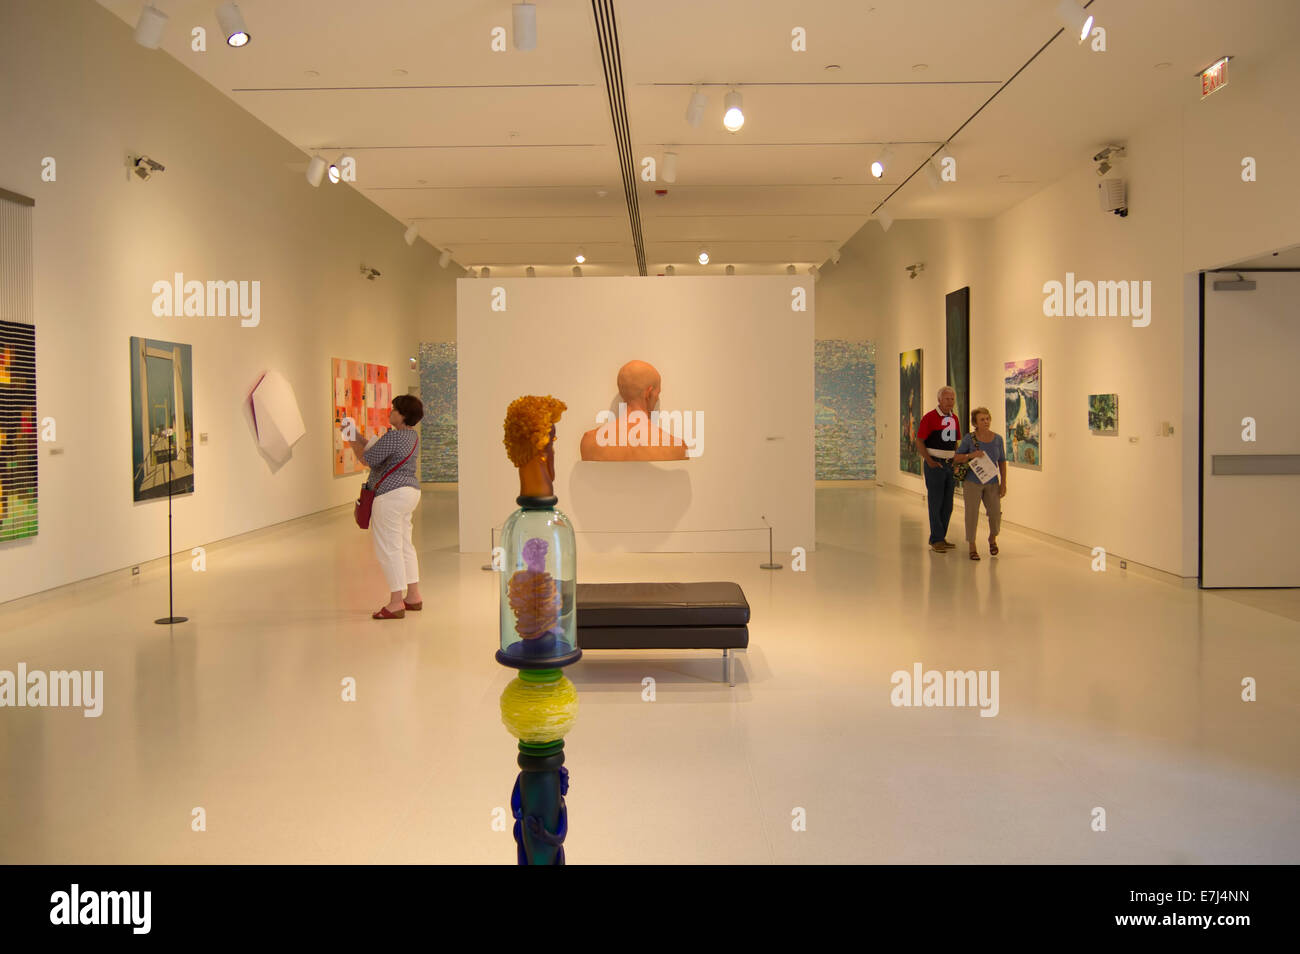 People wander around in an art museum gallery. Stock Photo